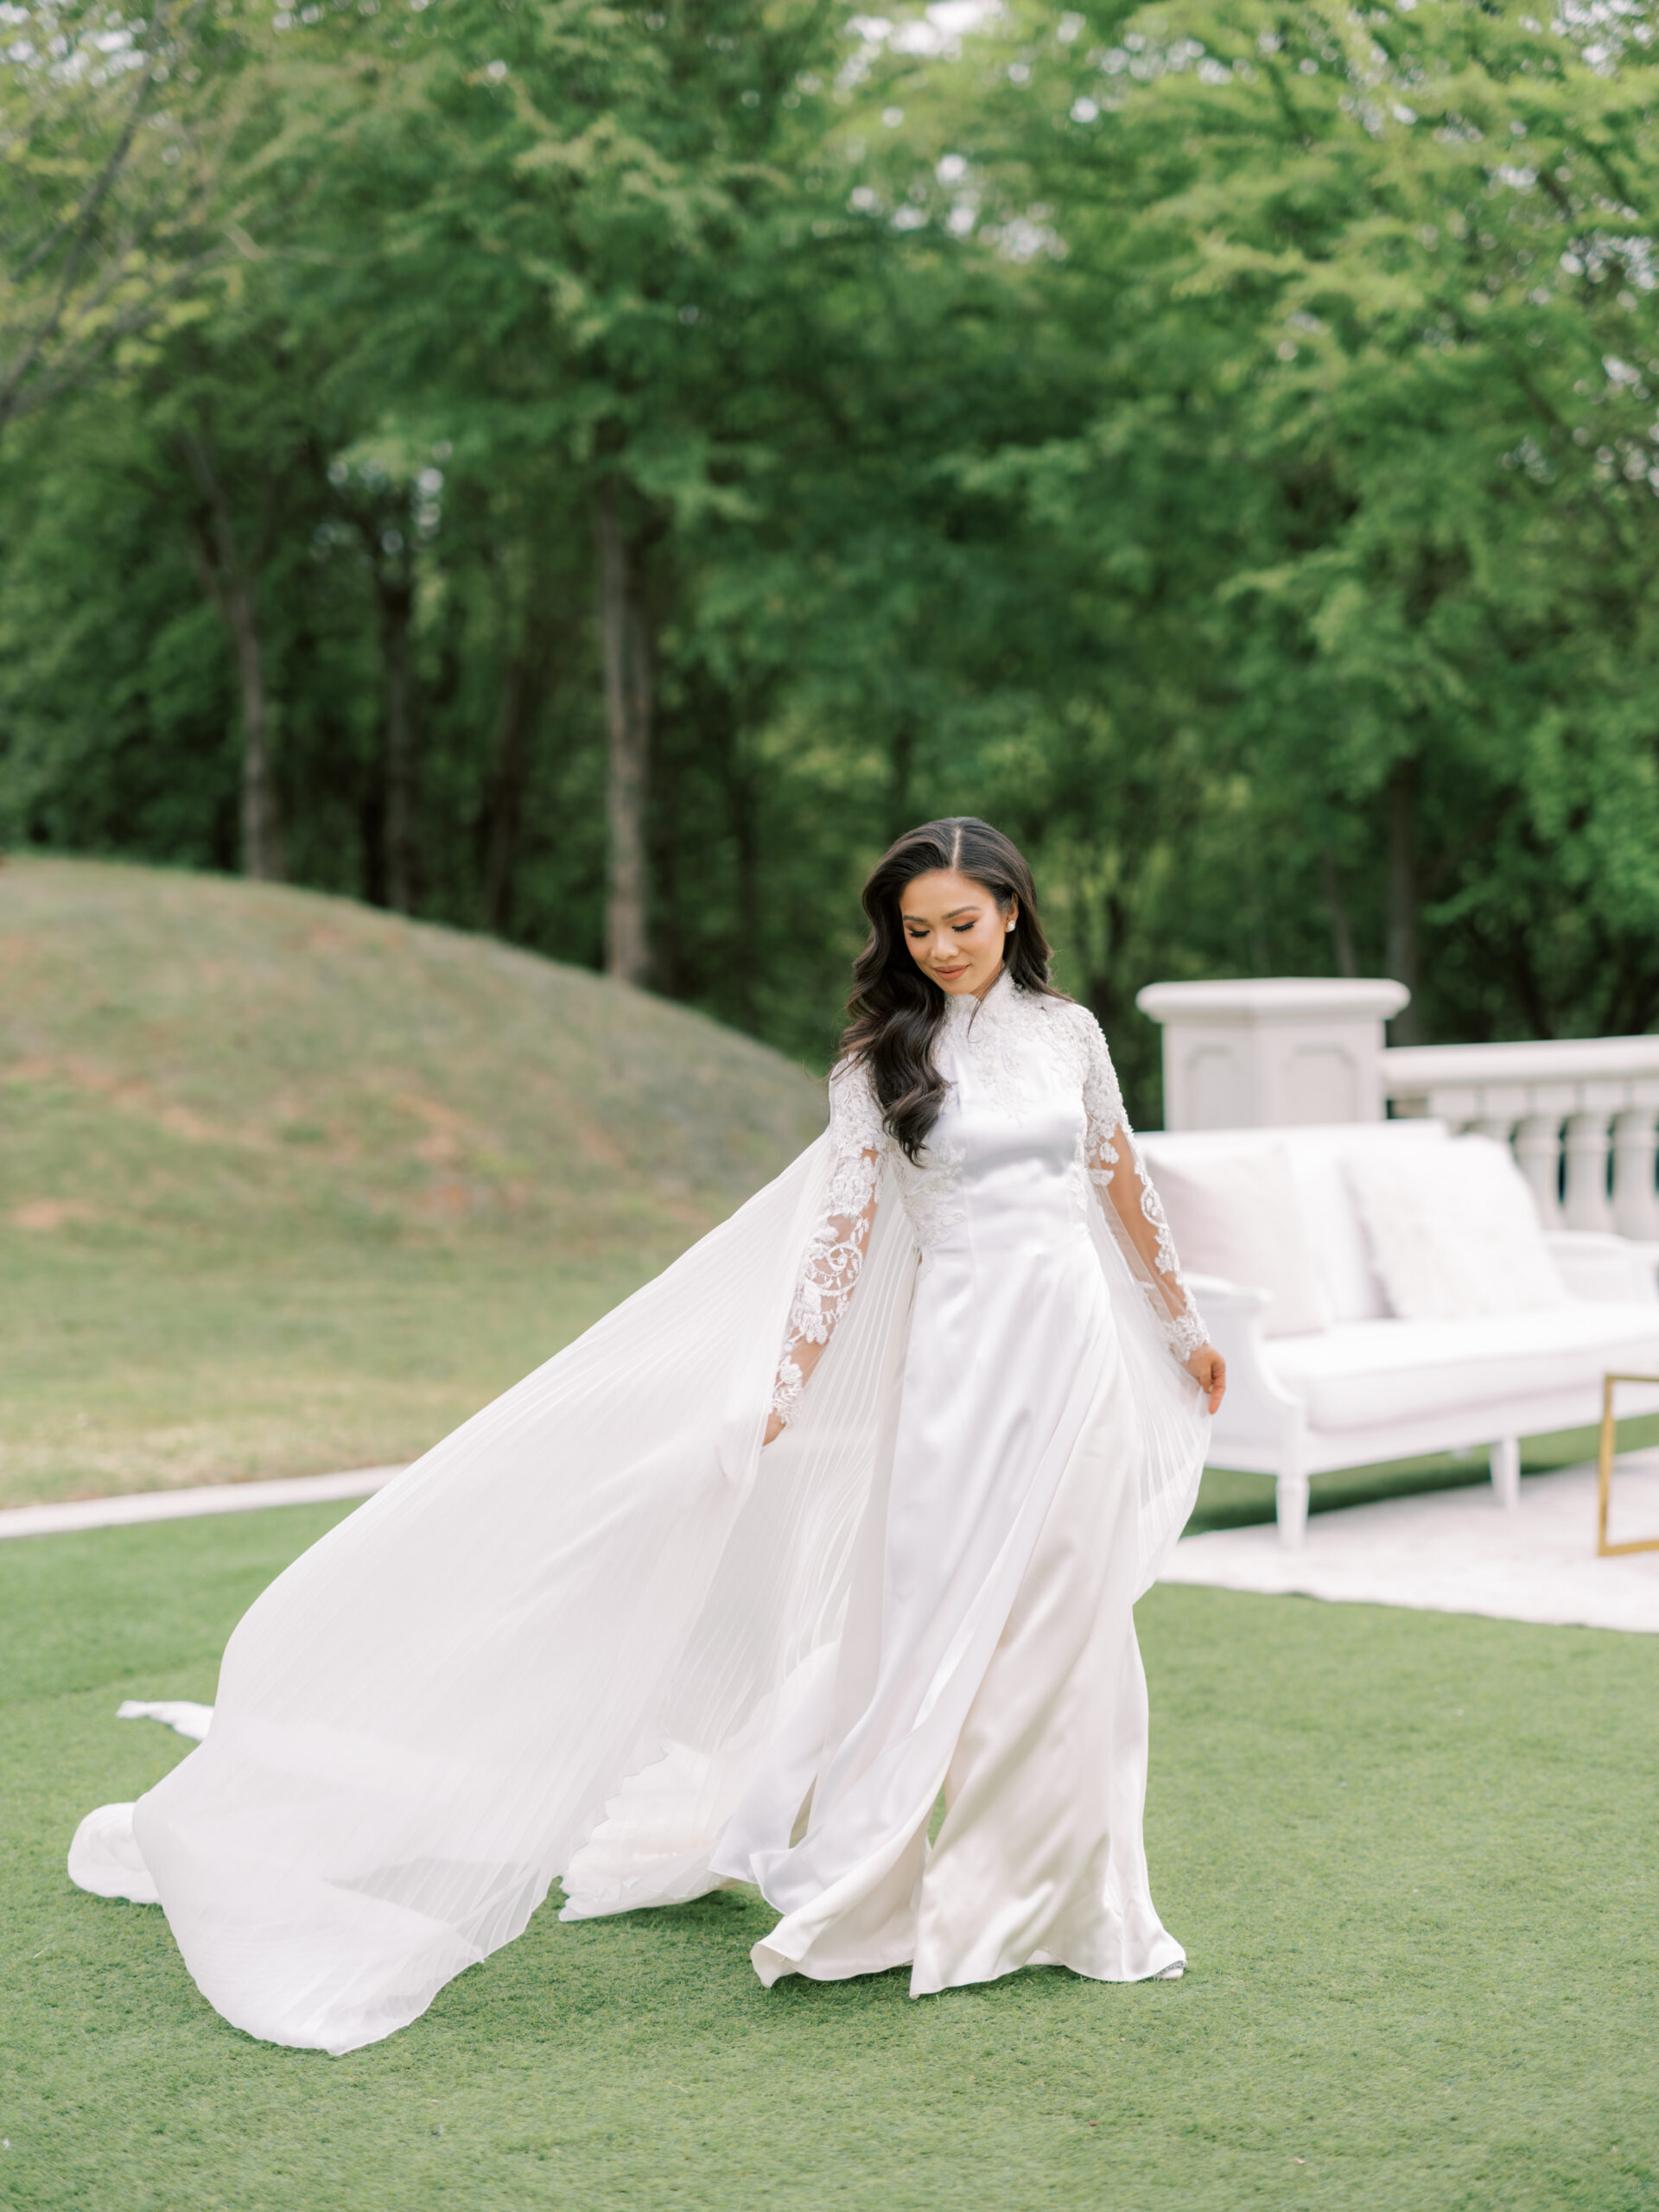 Hoang-Kim Cung wears a white wedding ao dai by Thai Nguyen atelier with a long pleated cape, French lace and pearl earrings by Olive + Piper